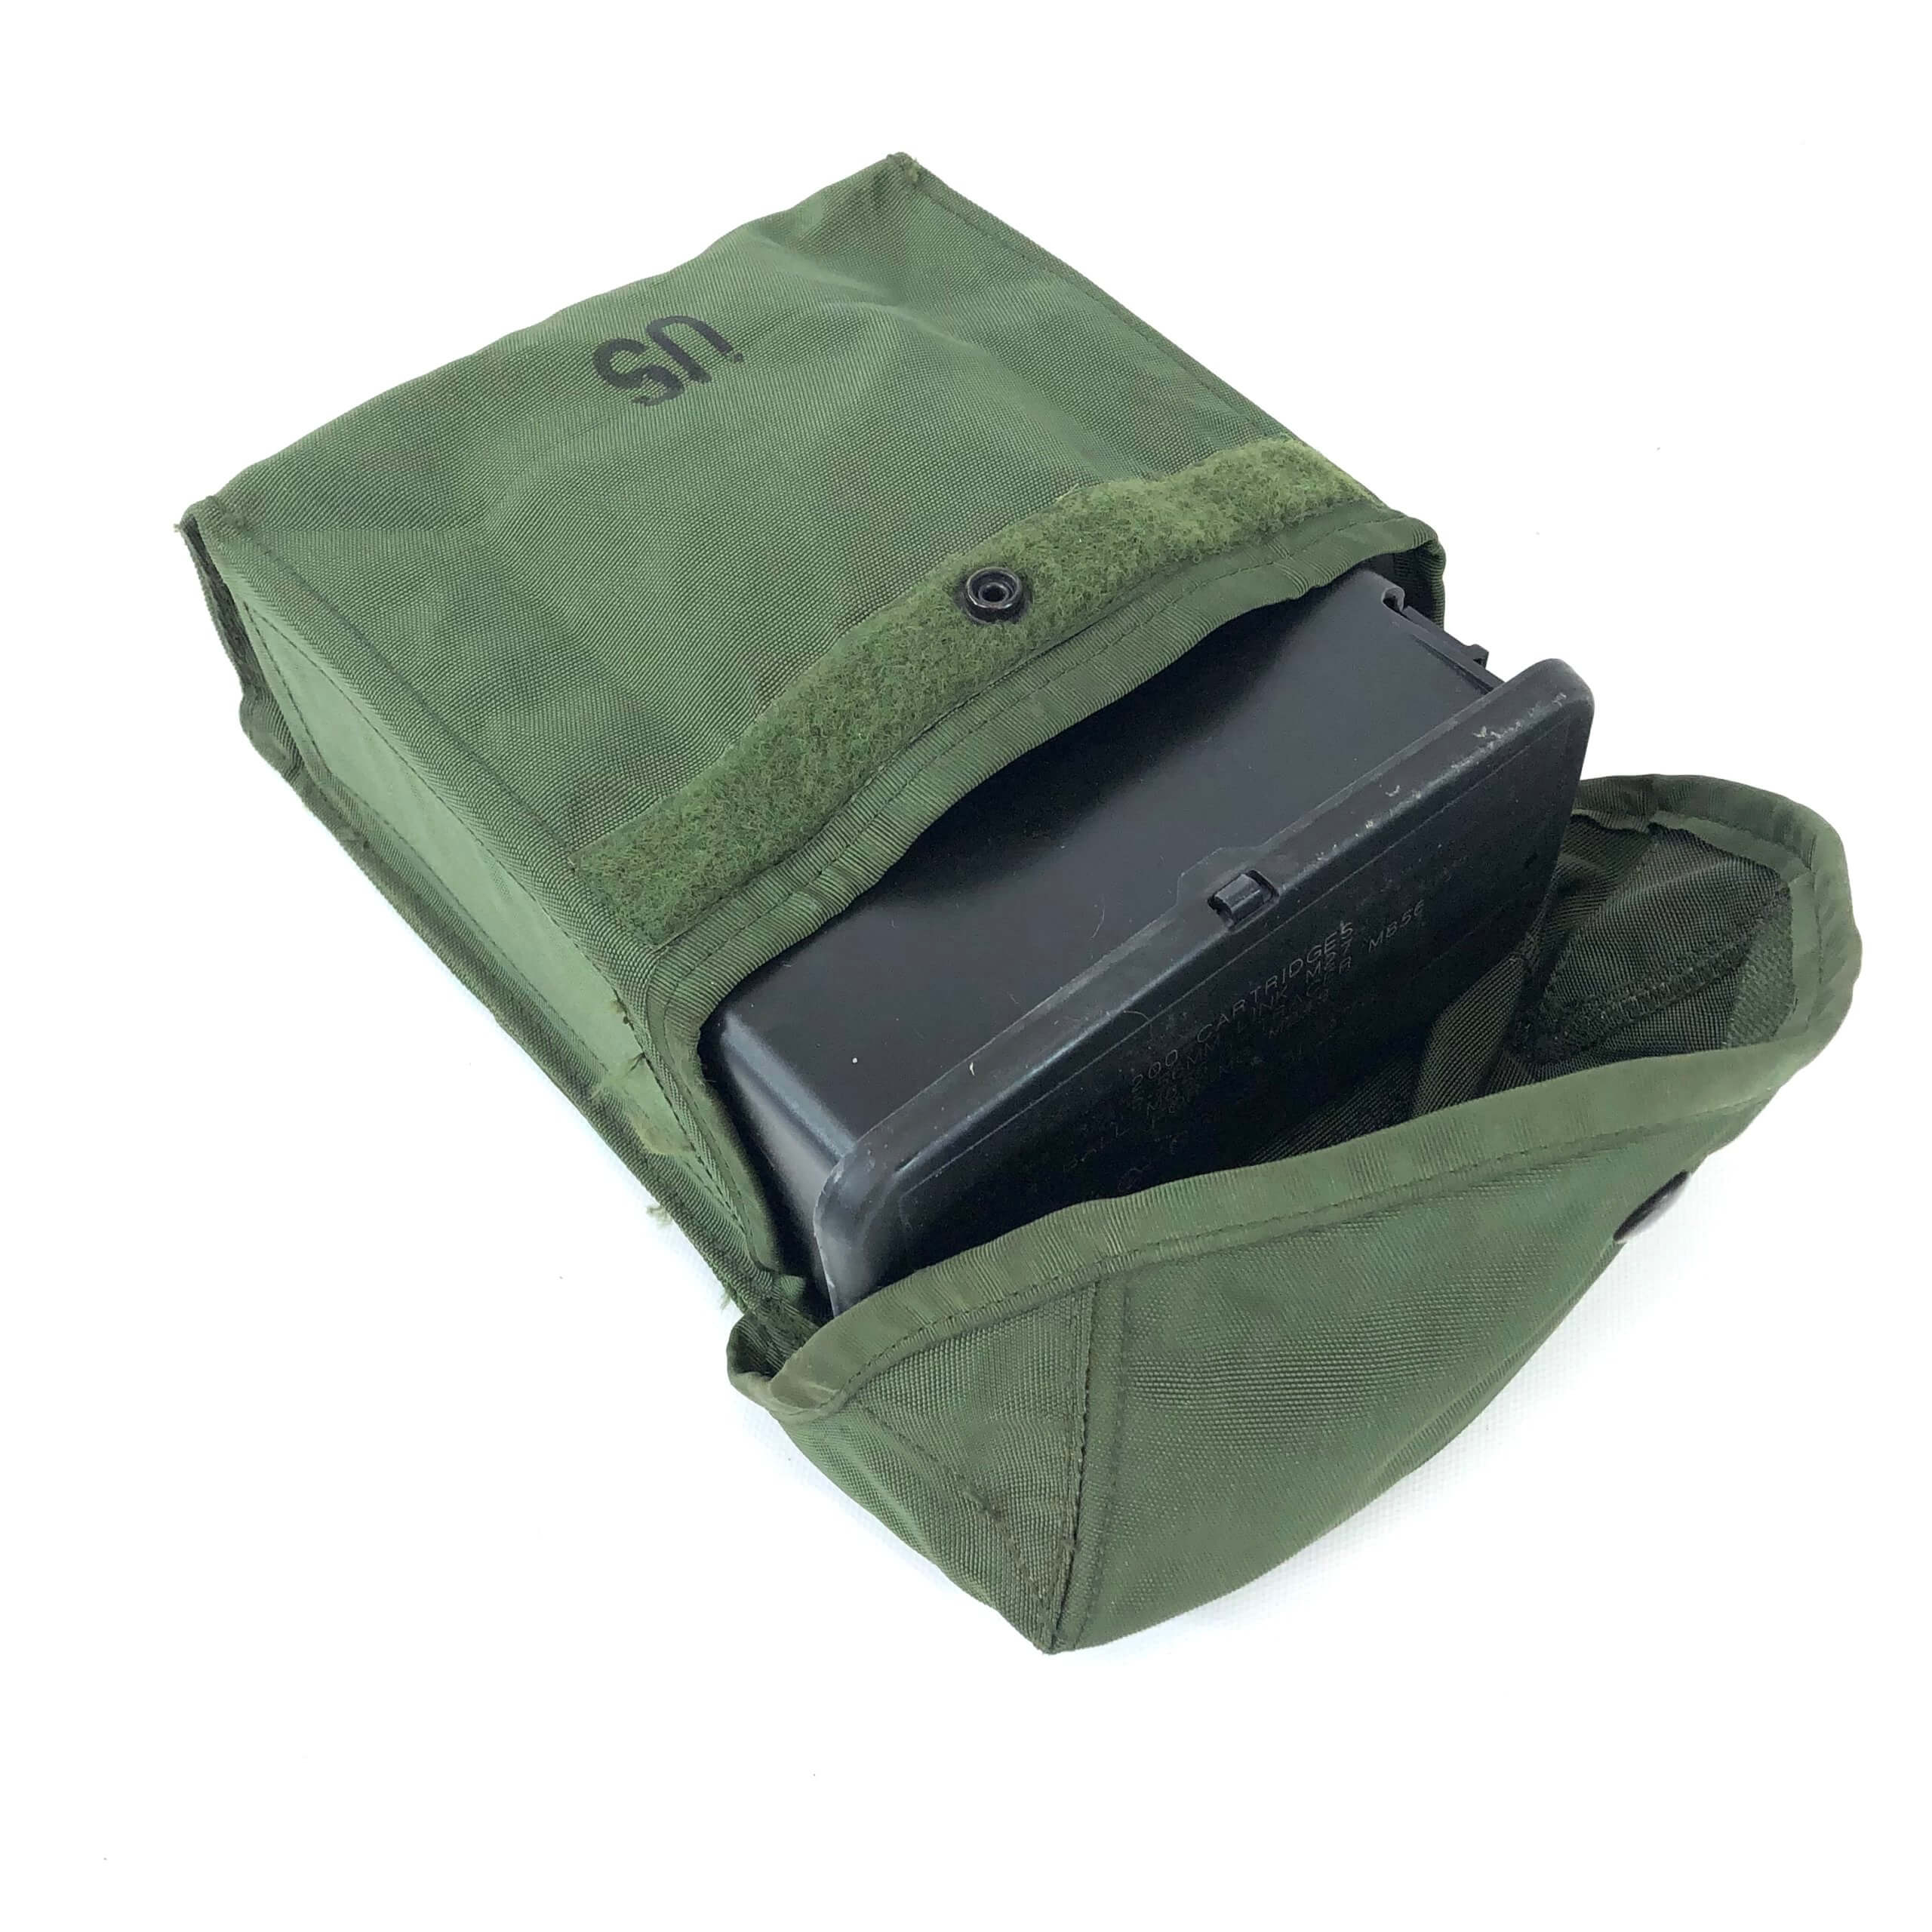 Case Pouch Sustainment General Purpose Utility Ration Ammo SAW Water ALICE w P38 